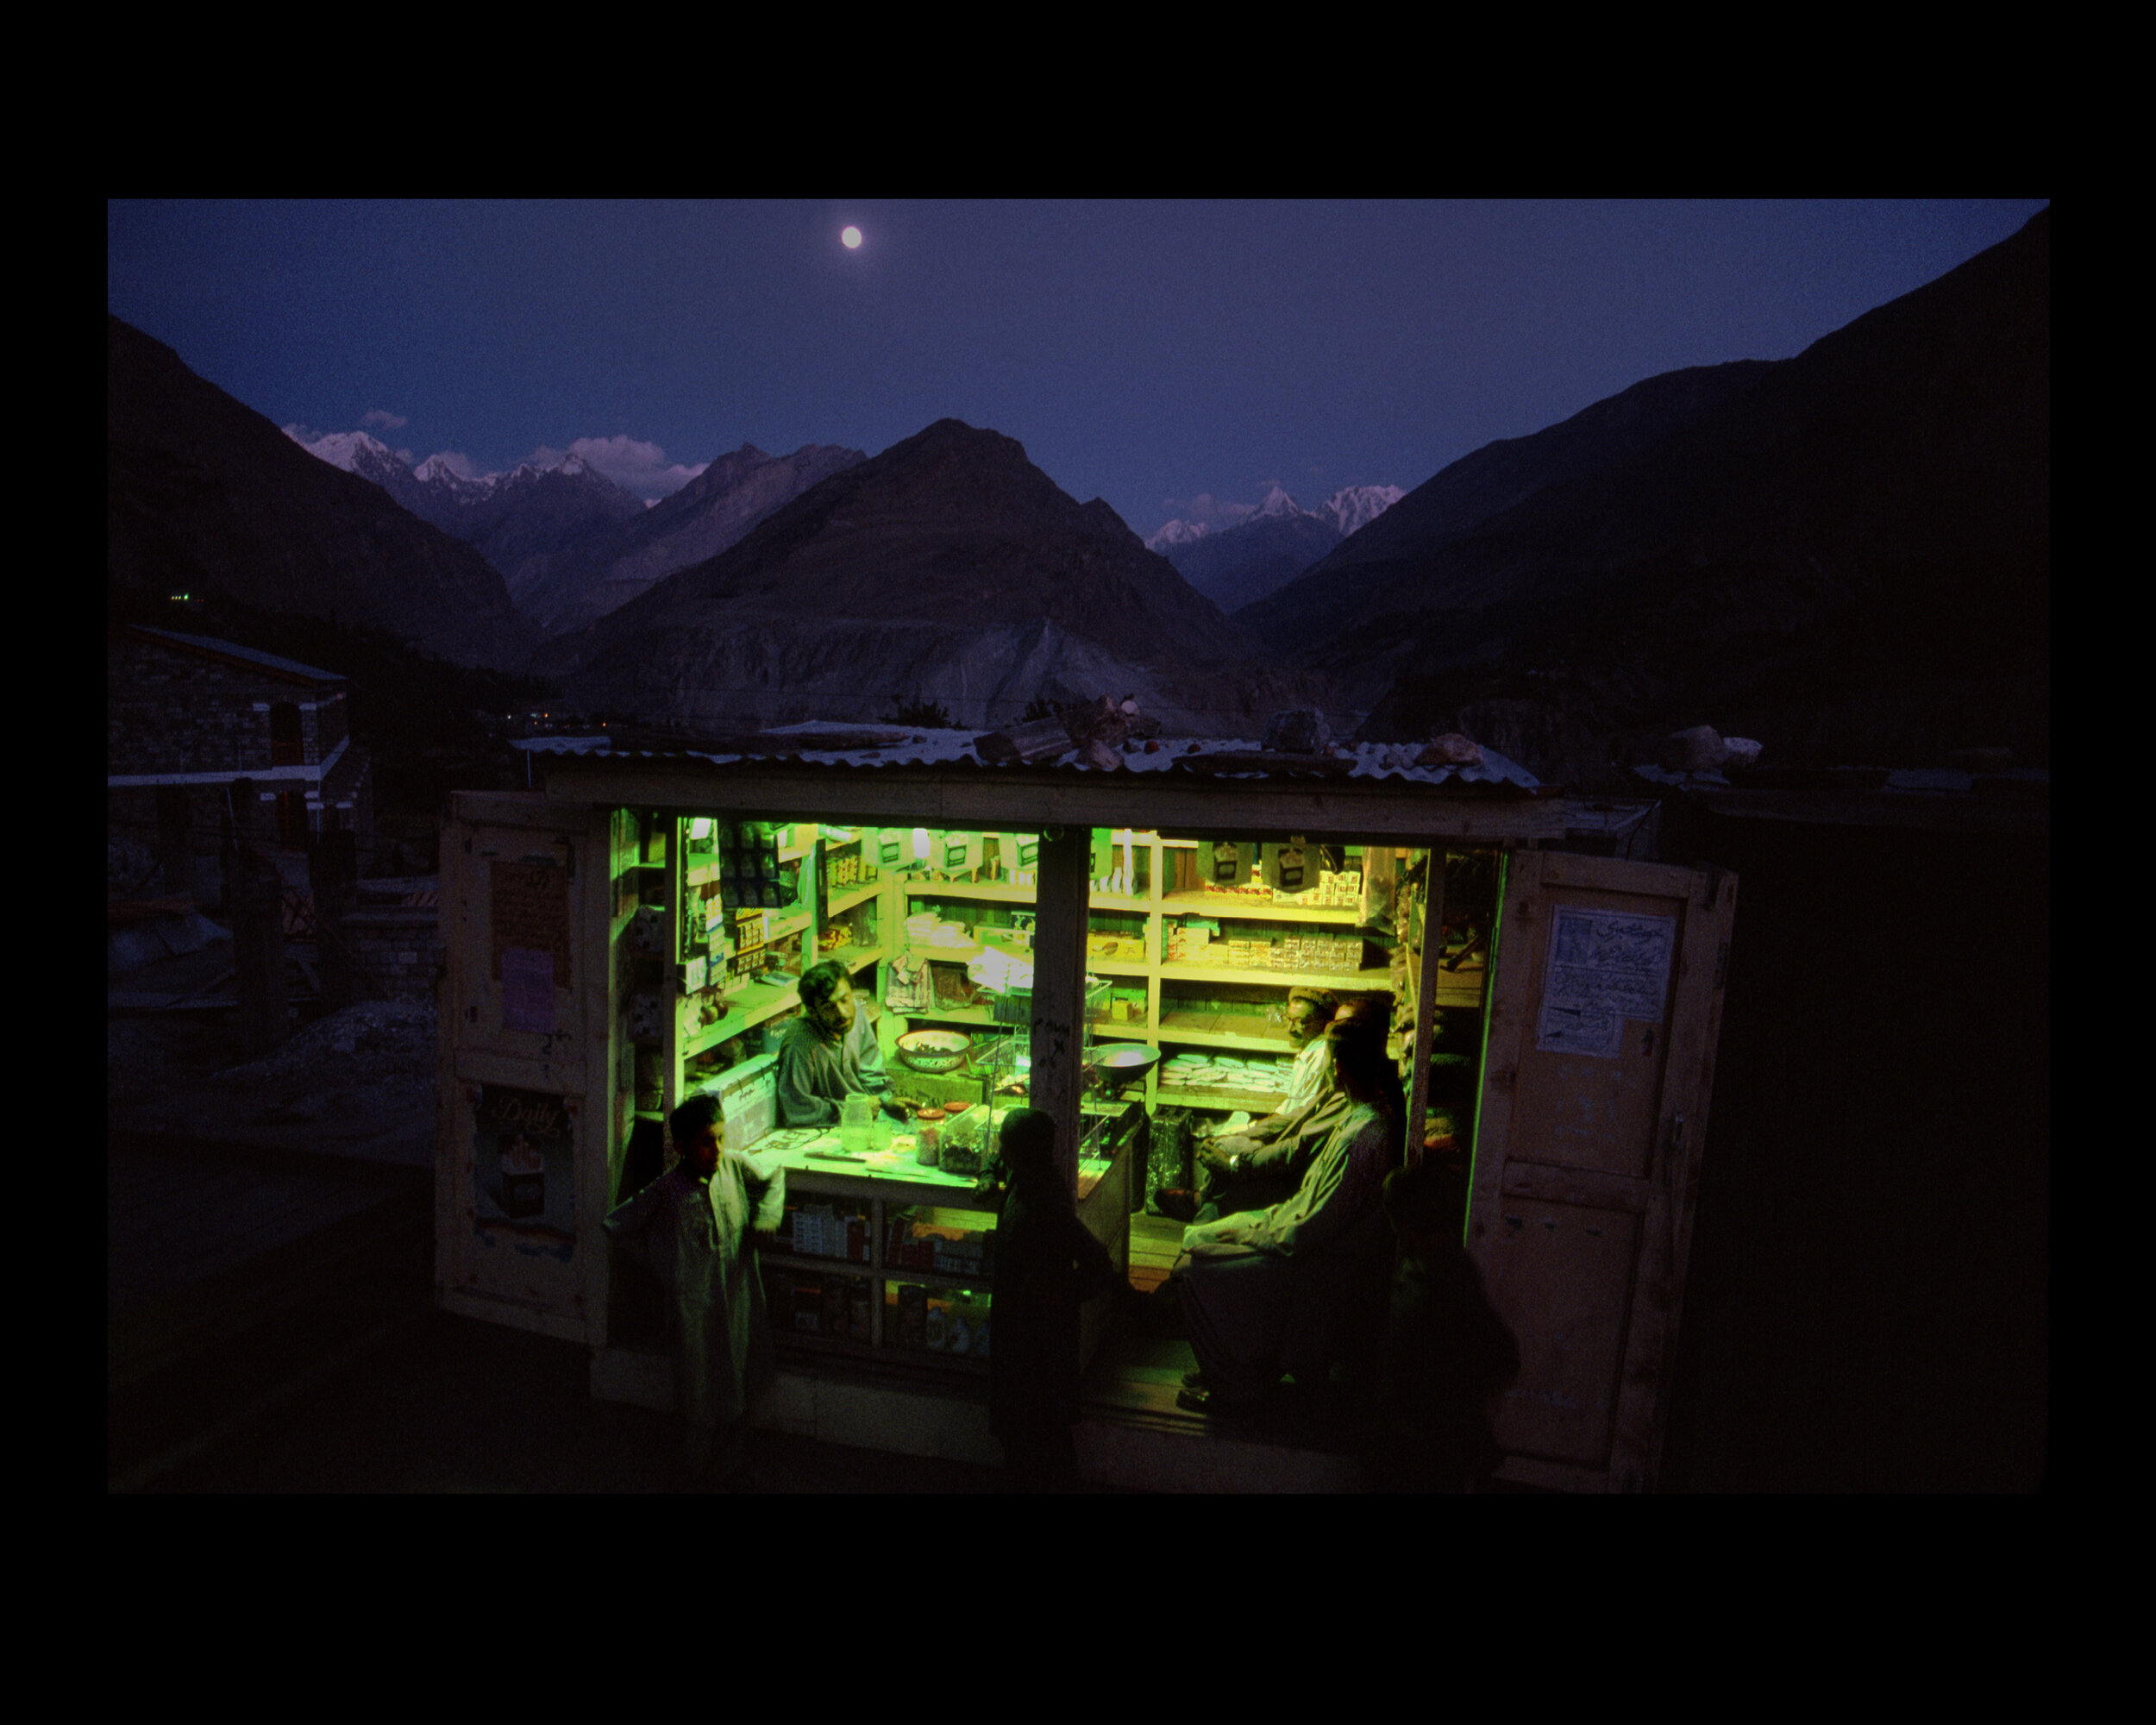  A roadside food stand along the Karakorum Highway in the Northern Areas, which connects Pakistan to China, and is the highest paved road on earth. 1998 